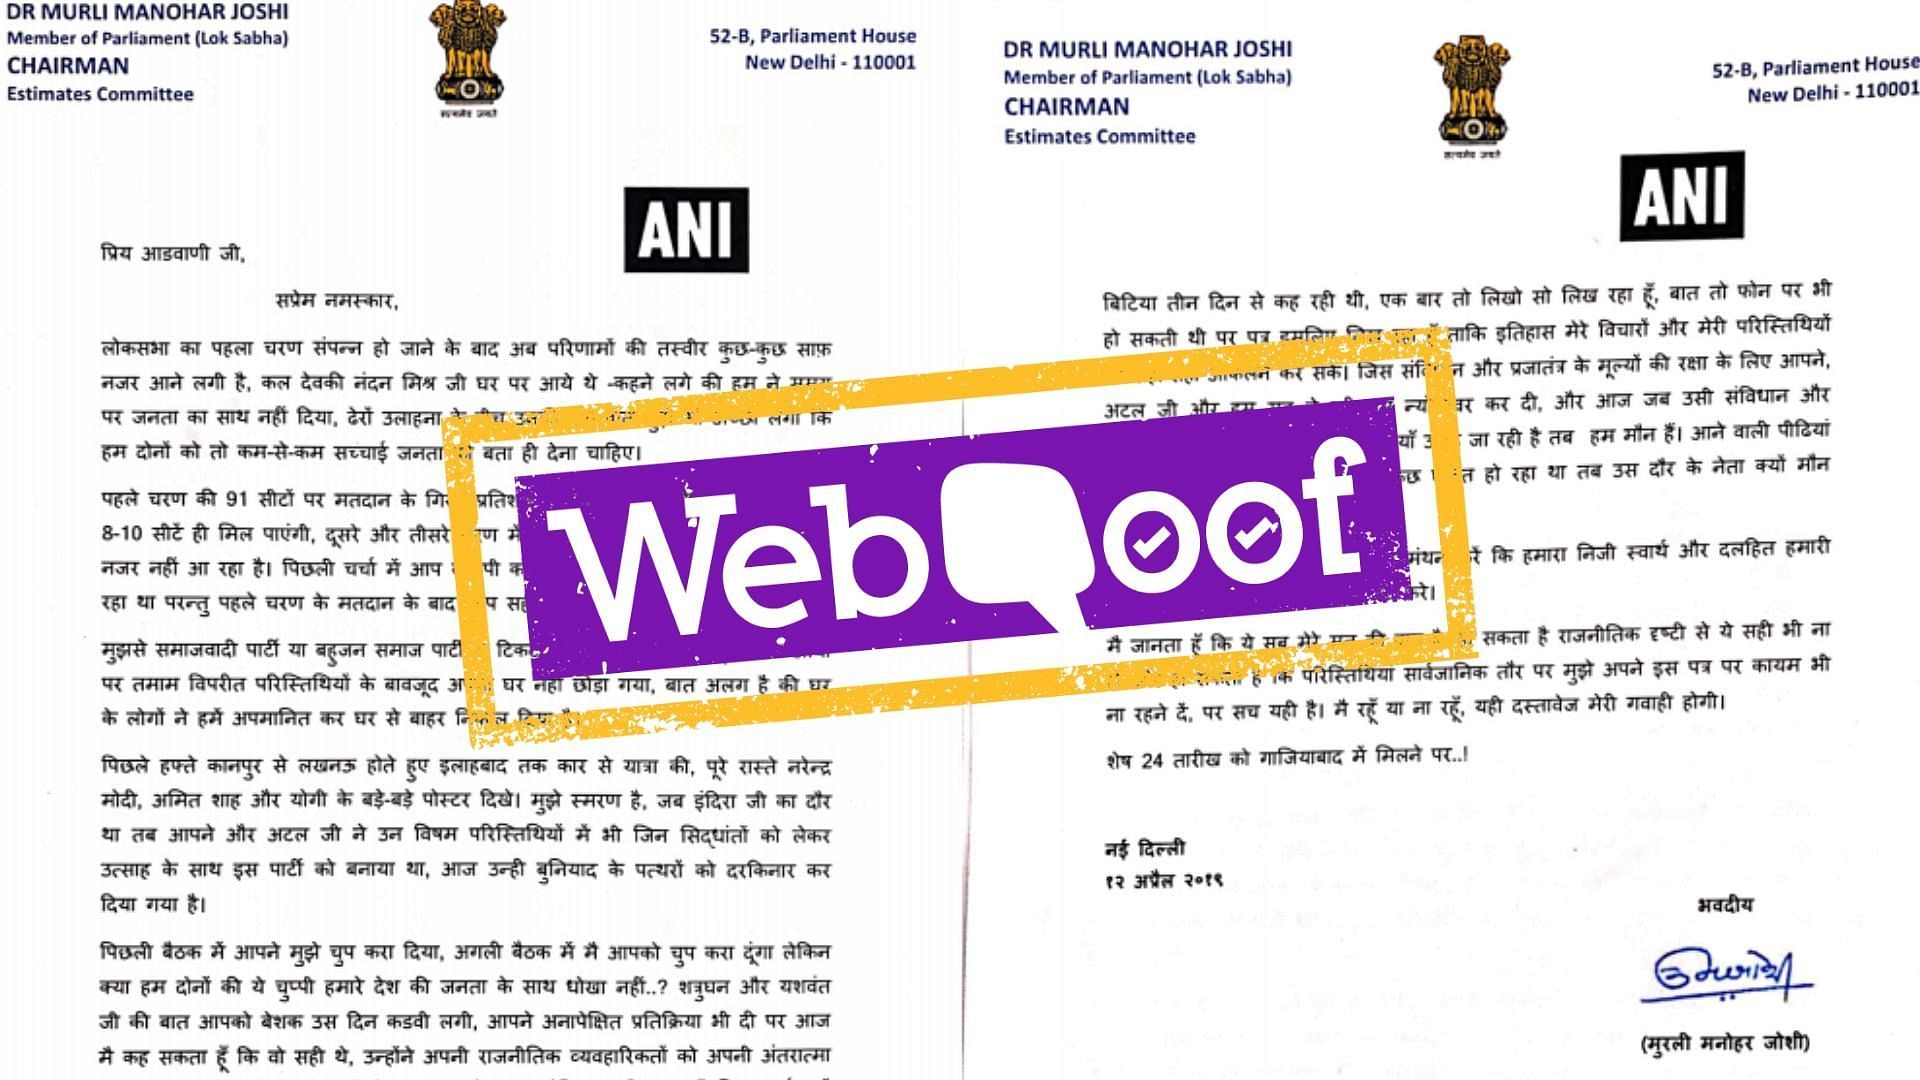 A fake letter claiming to be from Murli Manohar Joshi to LK Advani went viral on social media.